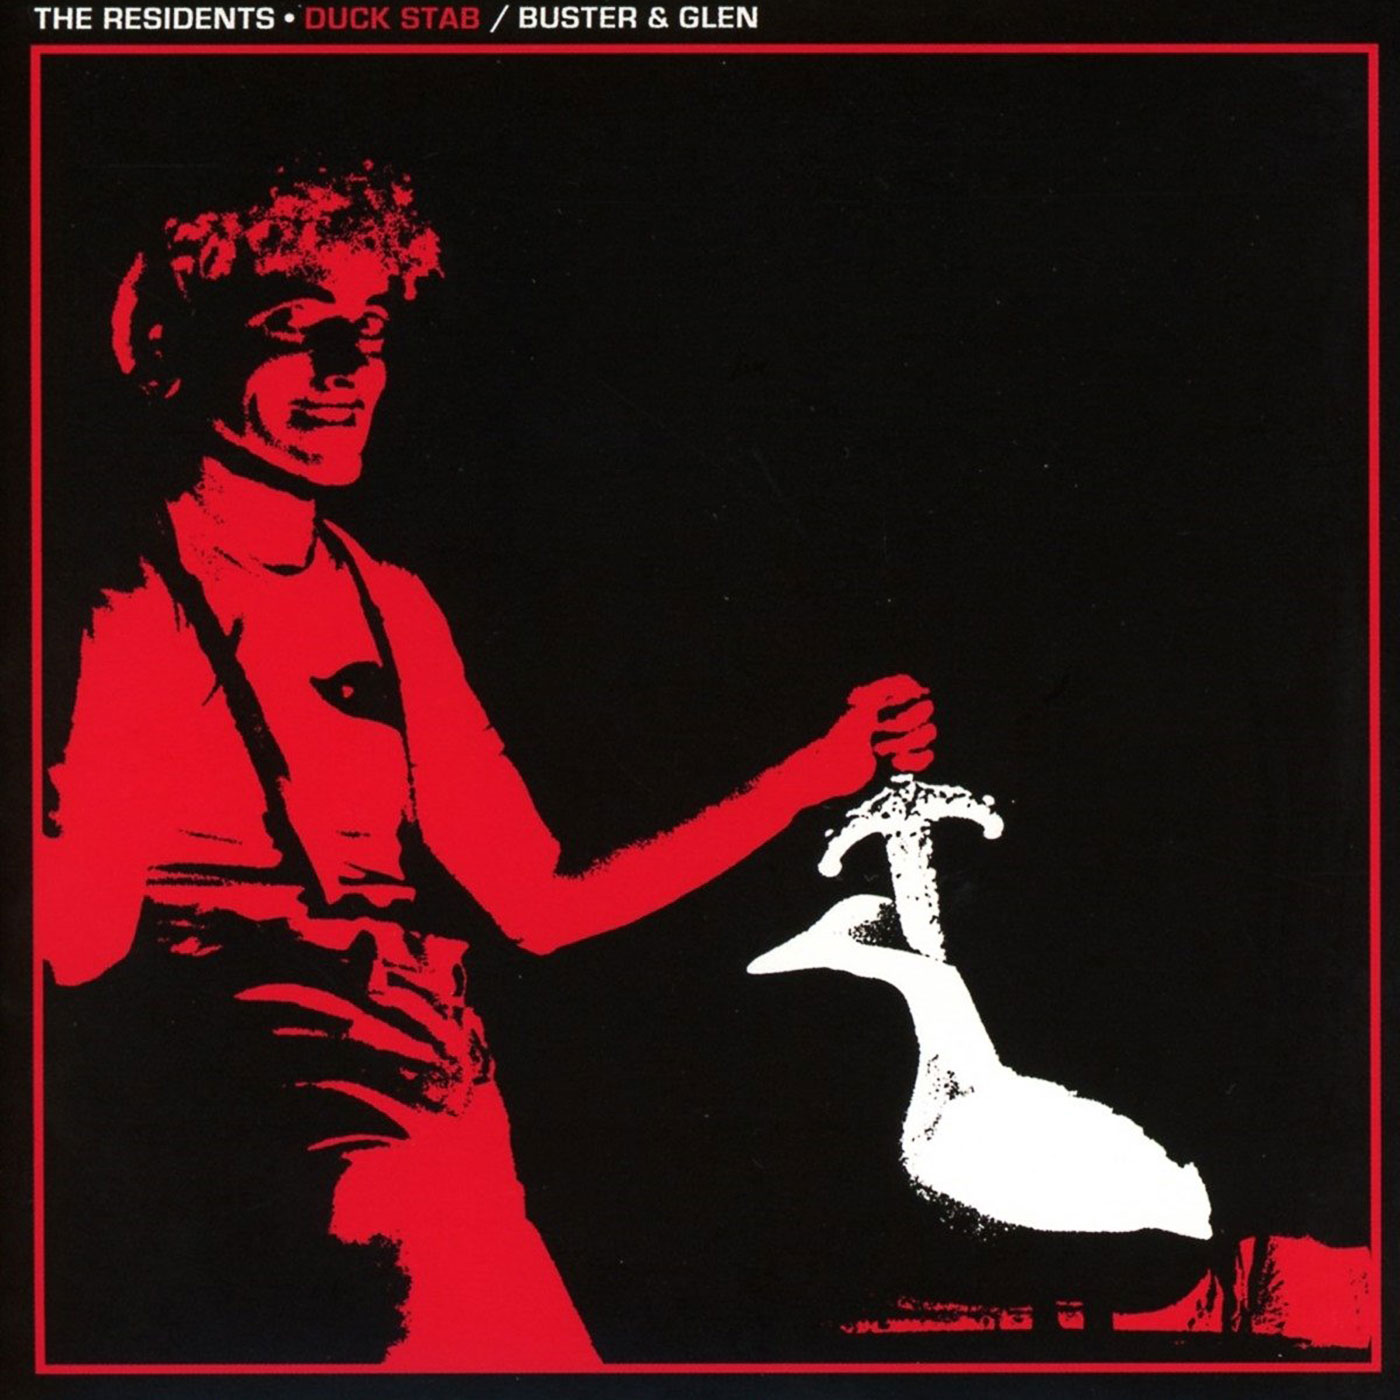 406 The Residents – Duck Stab/Buster and Glen